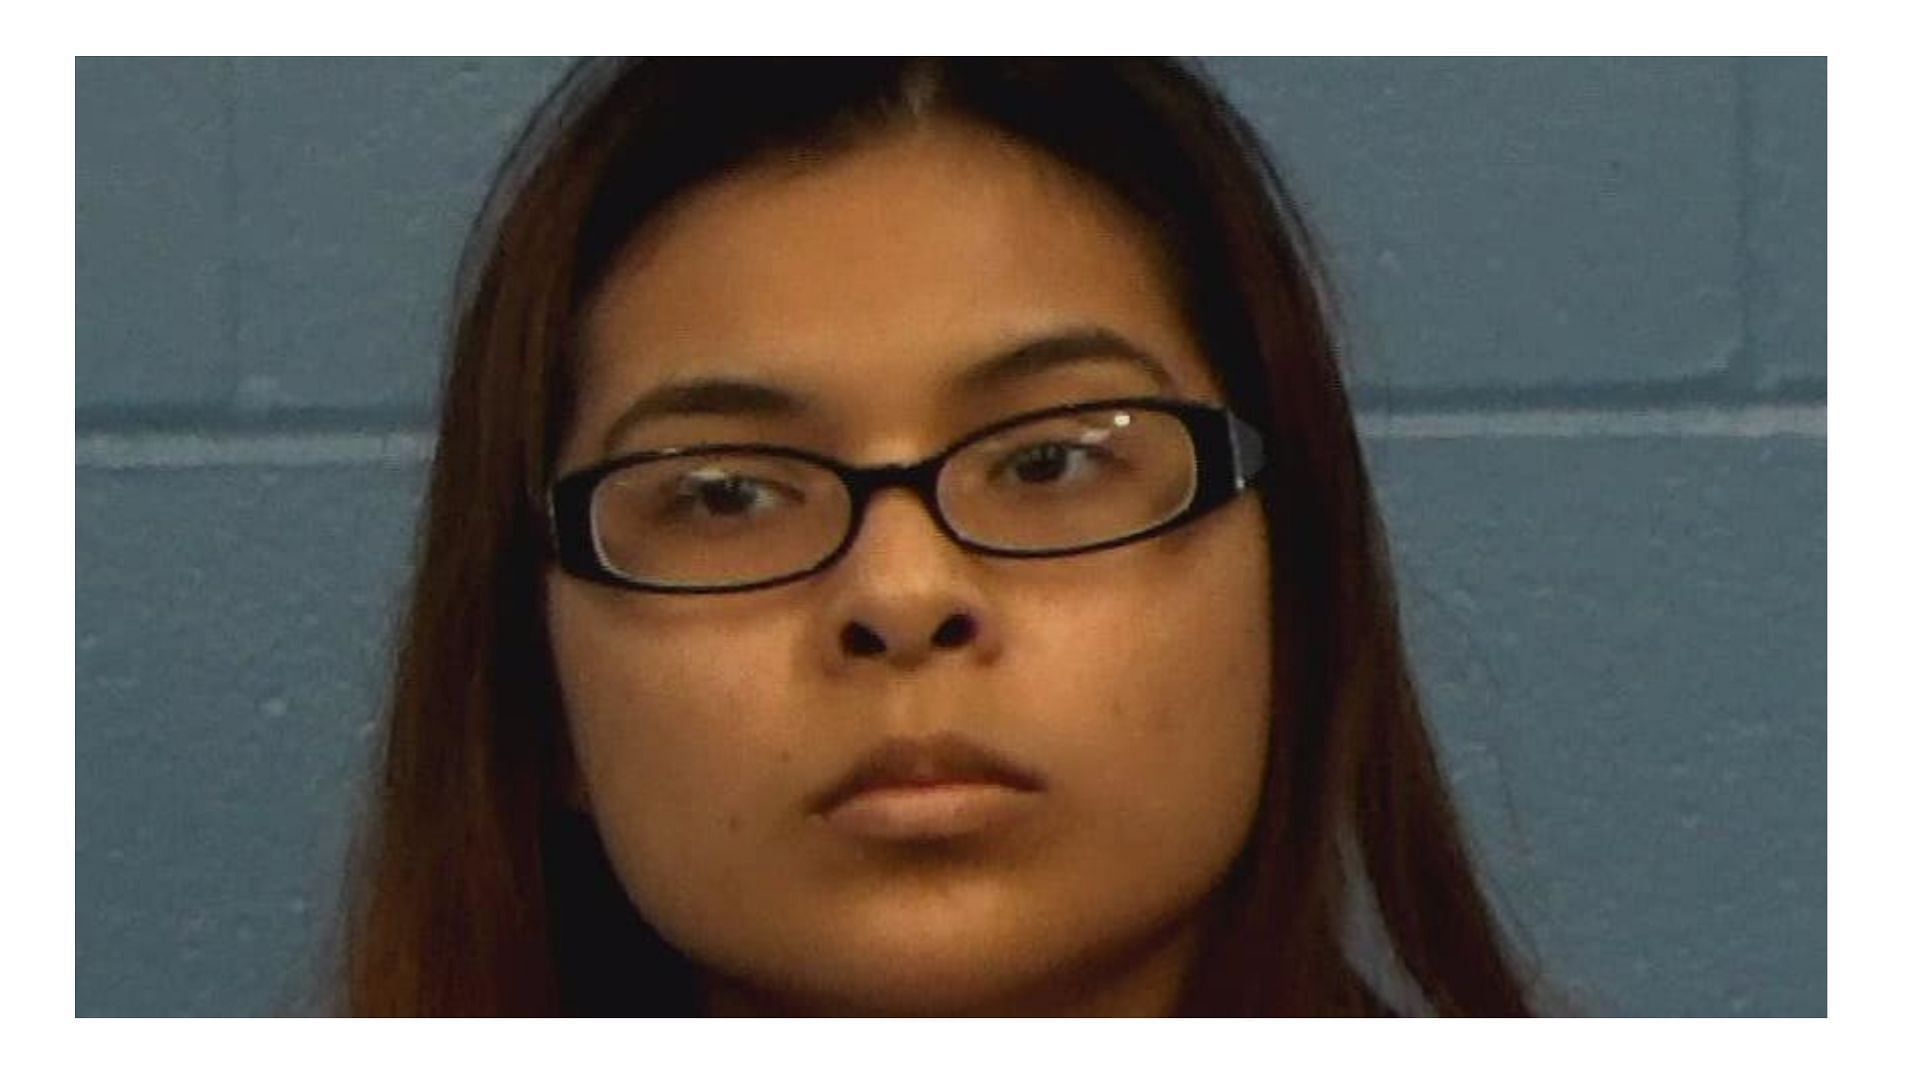 Victoria Tristan was charged 5 months after the death of her child (image via William County Jail)